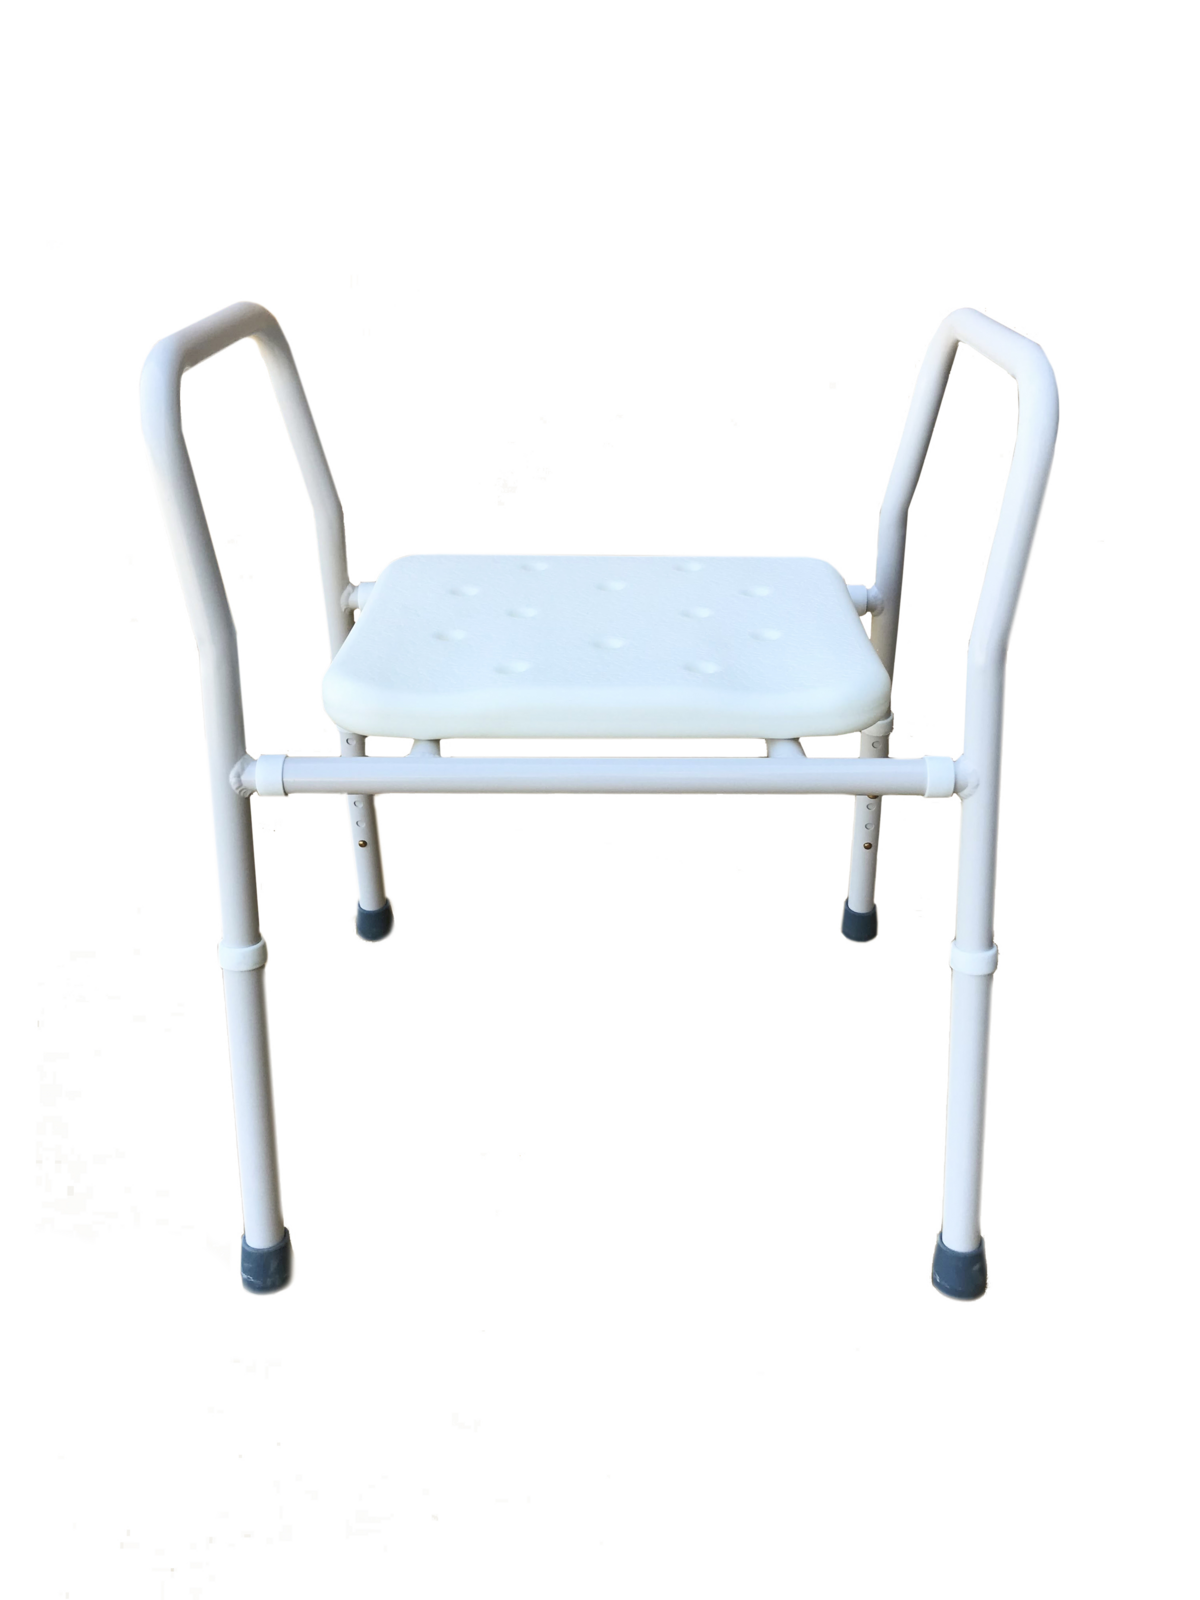 Dynamic Shower Stool Shower Stool Hire Melbourne Statewide Home Health Care